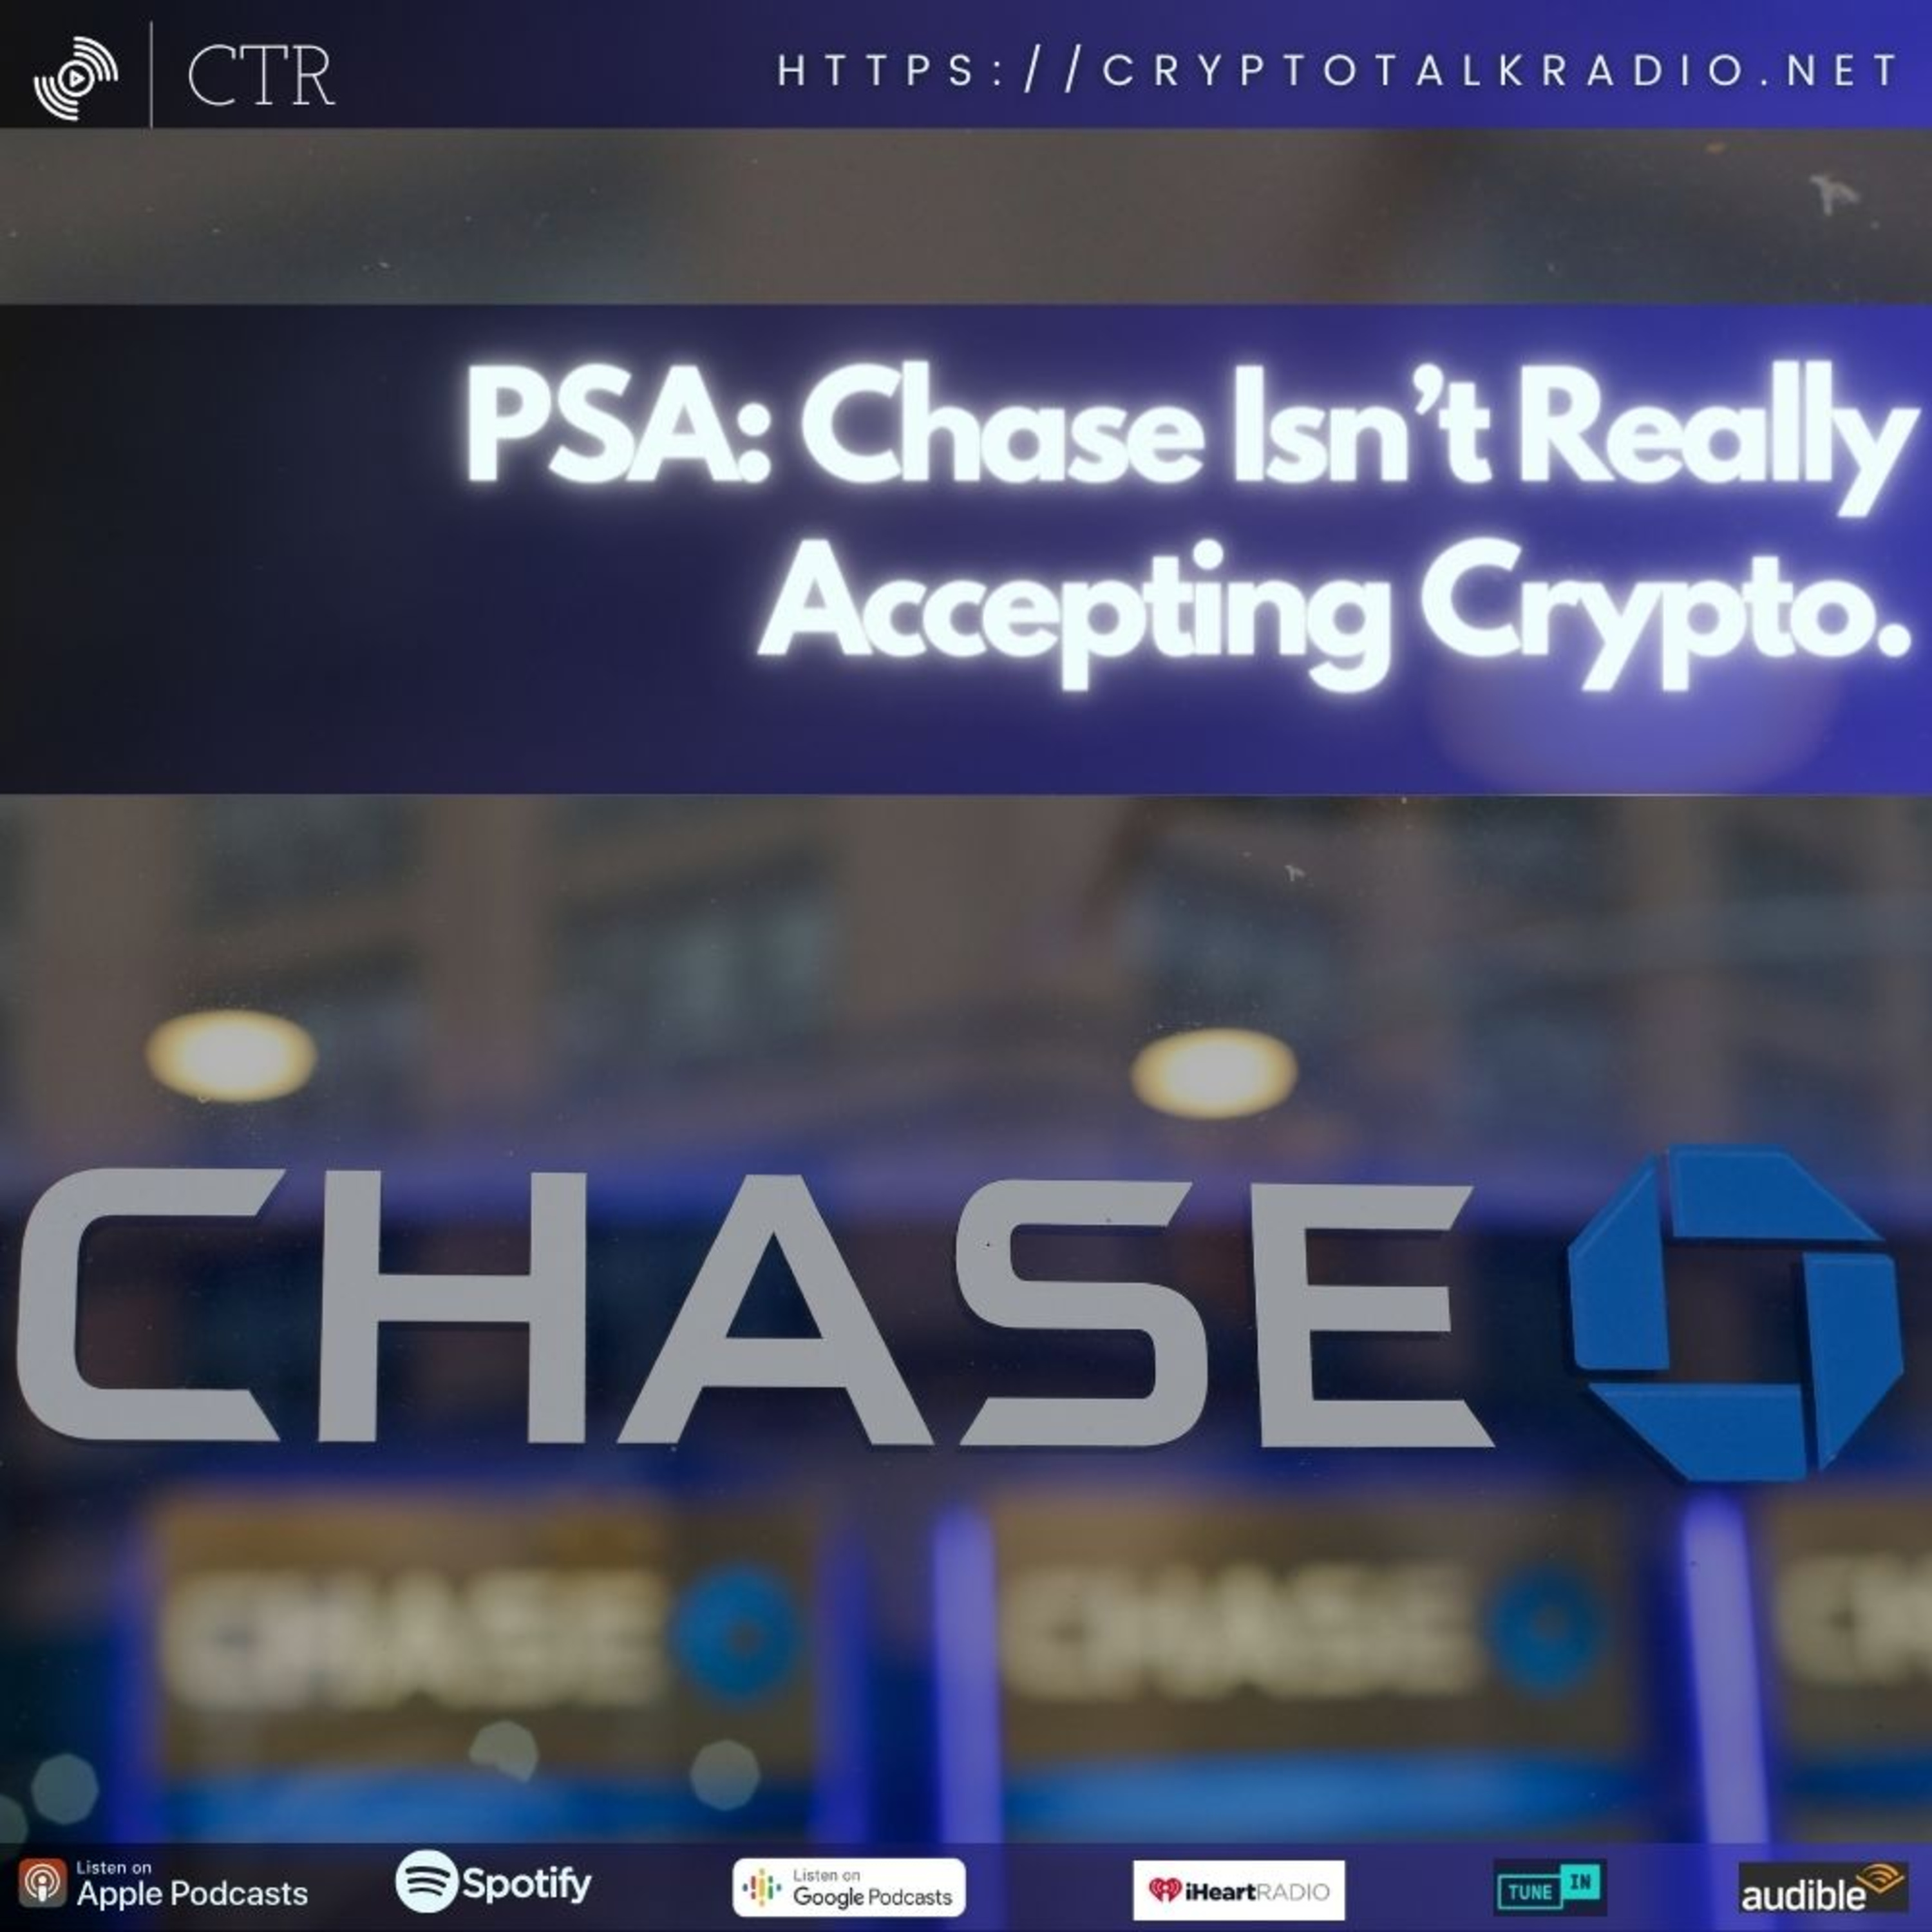 PSA: Chase Isn’t Really Accepting Crypto.